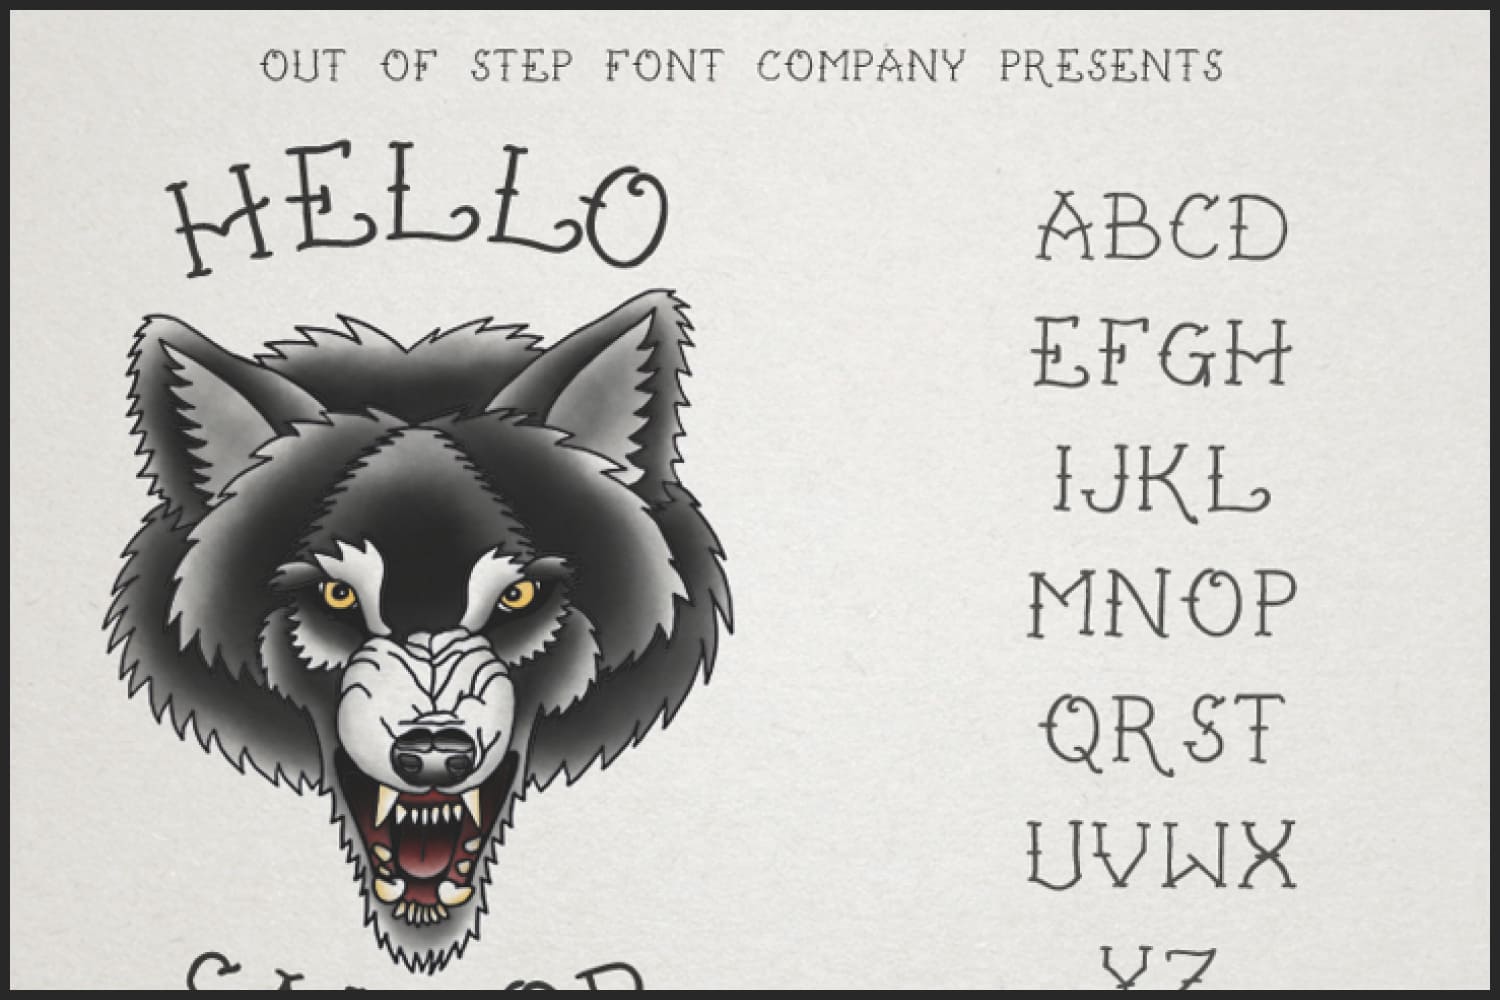 The image of the wolf and the alphabet on a gray background.